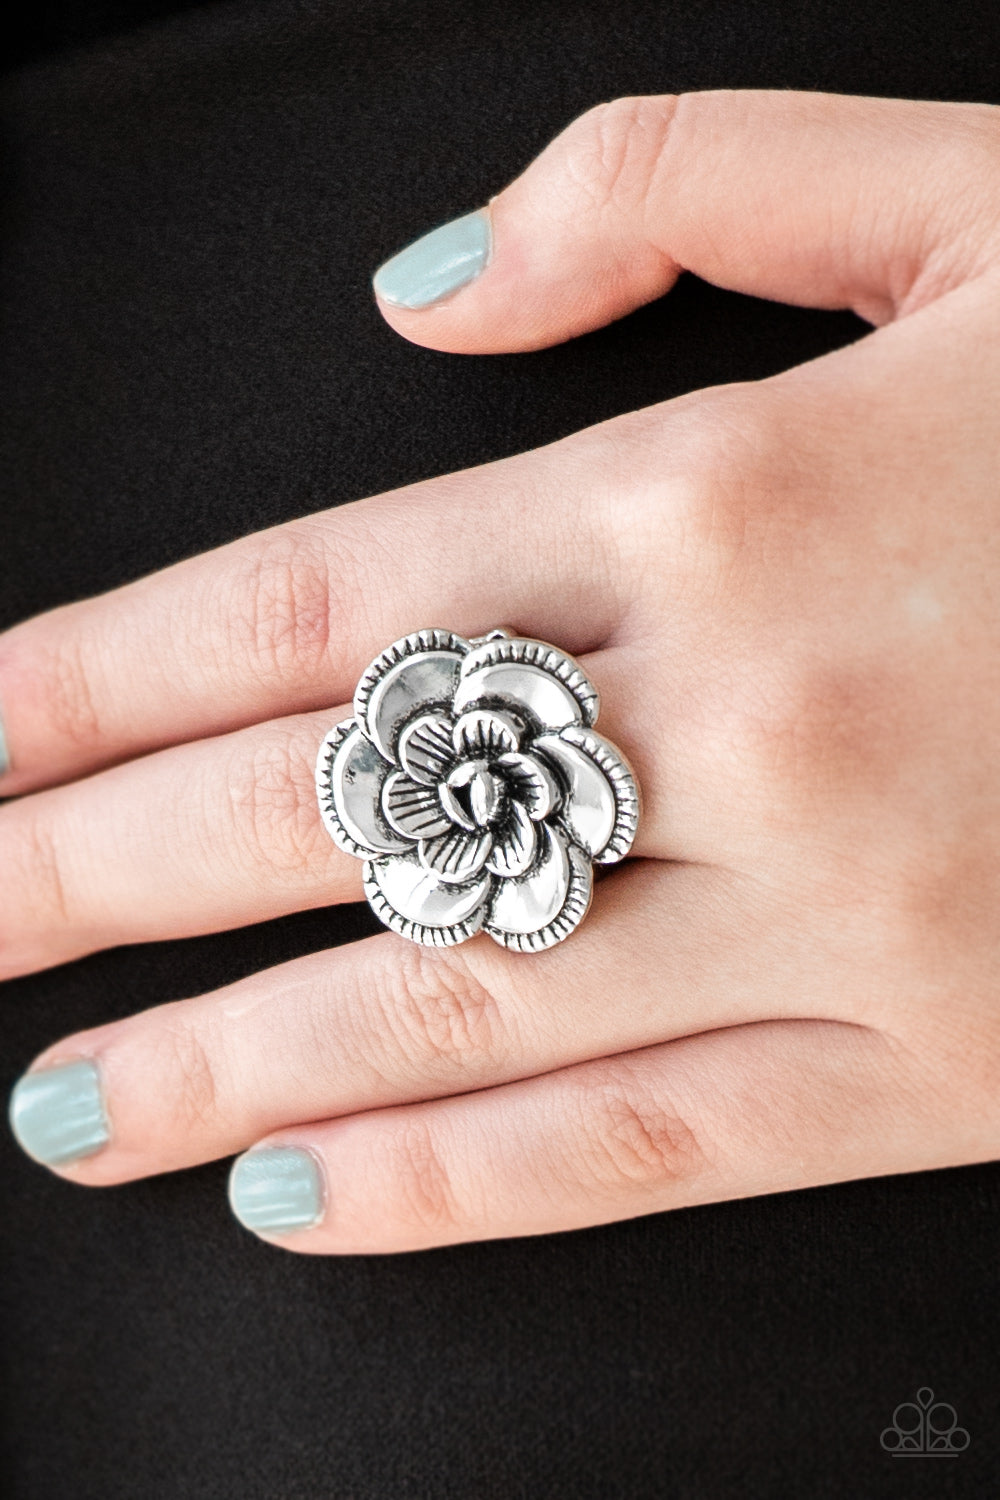 Flowerbed and Breakfast Silver Ring